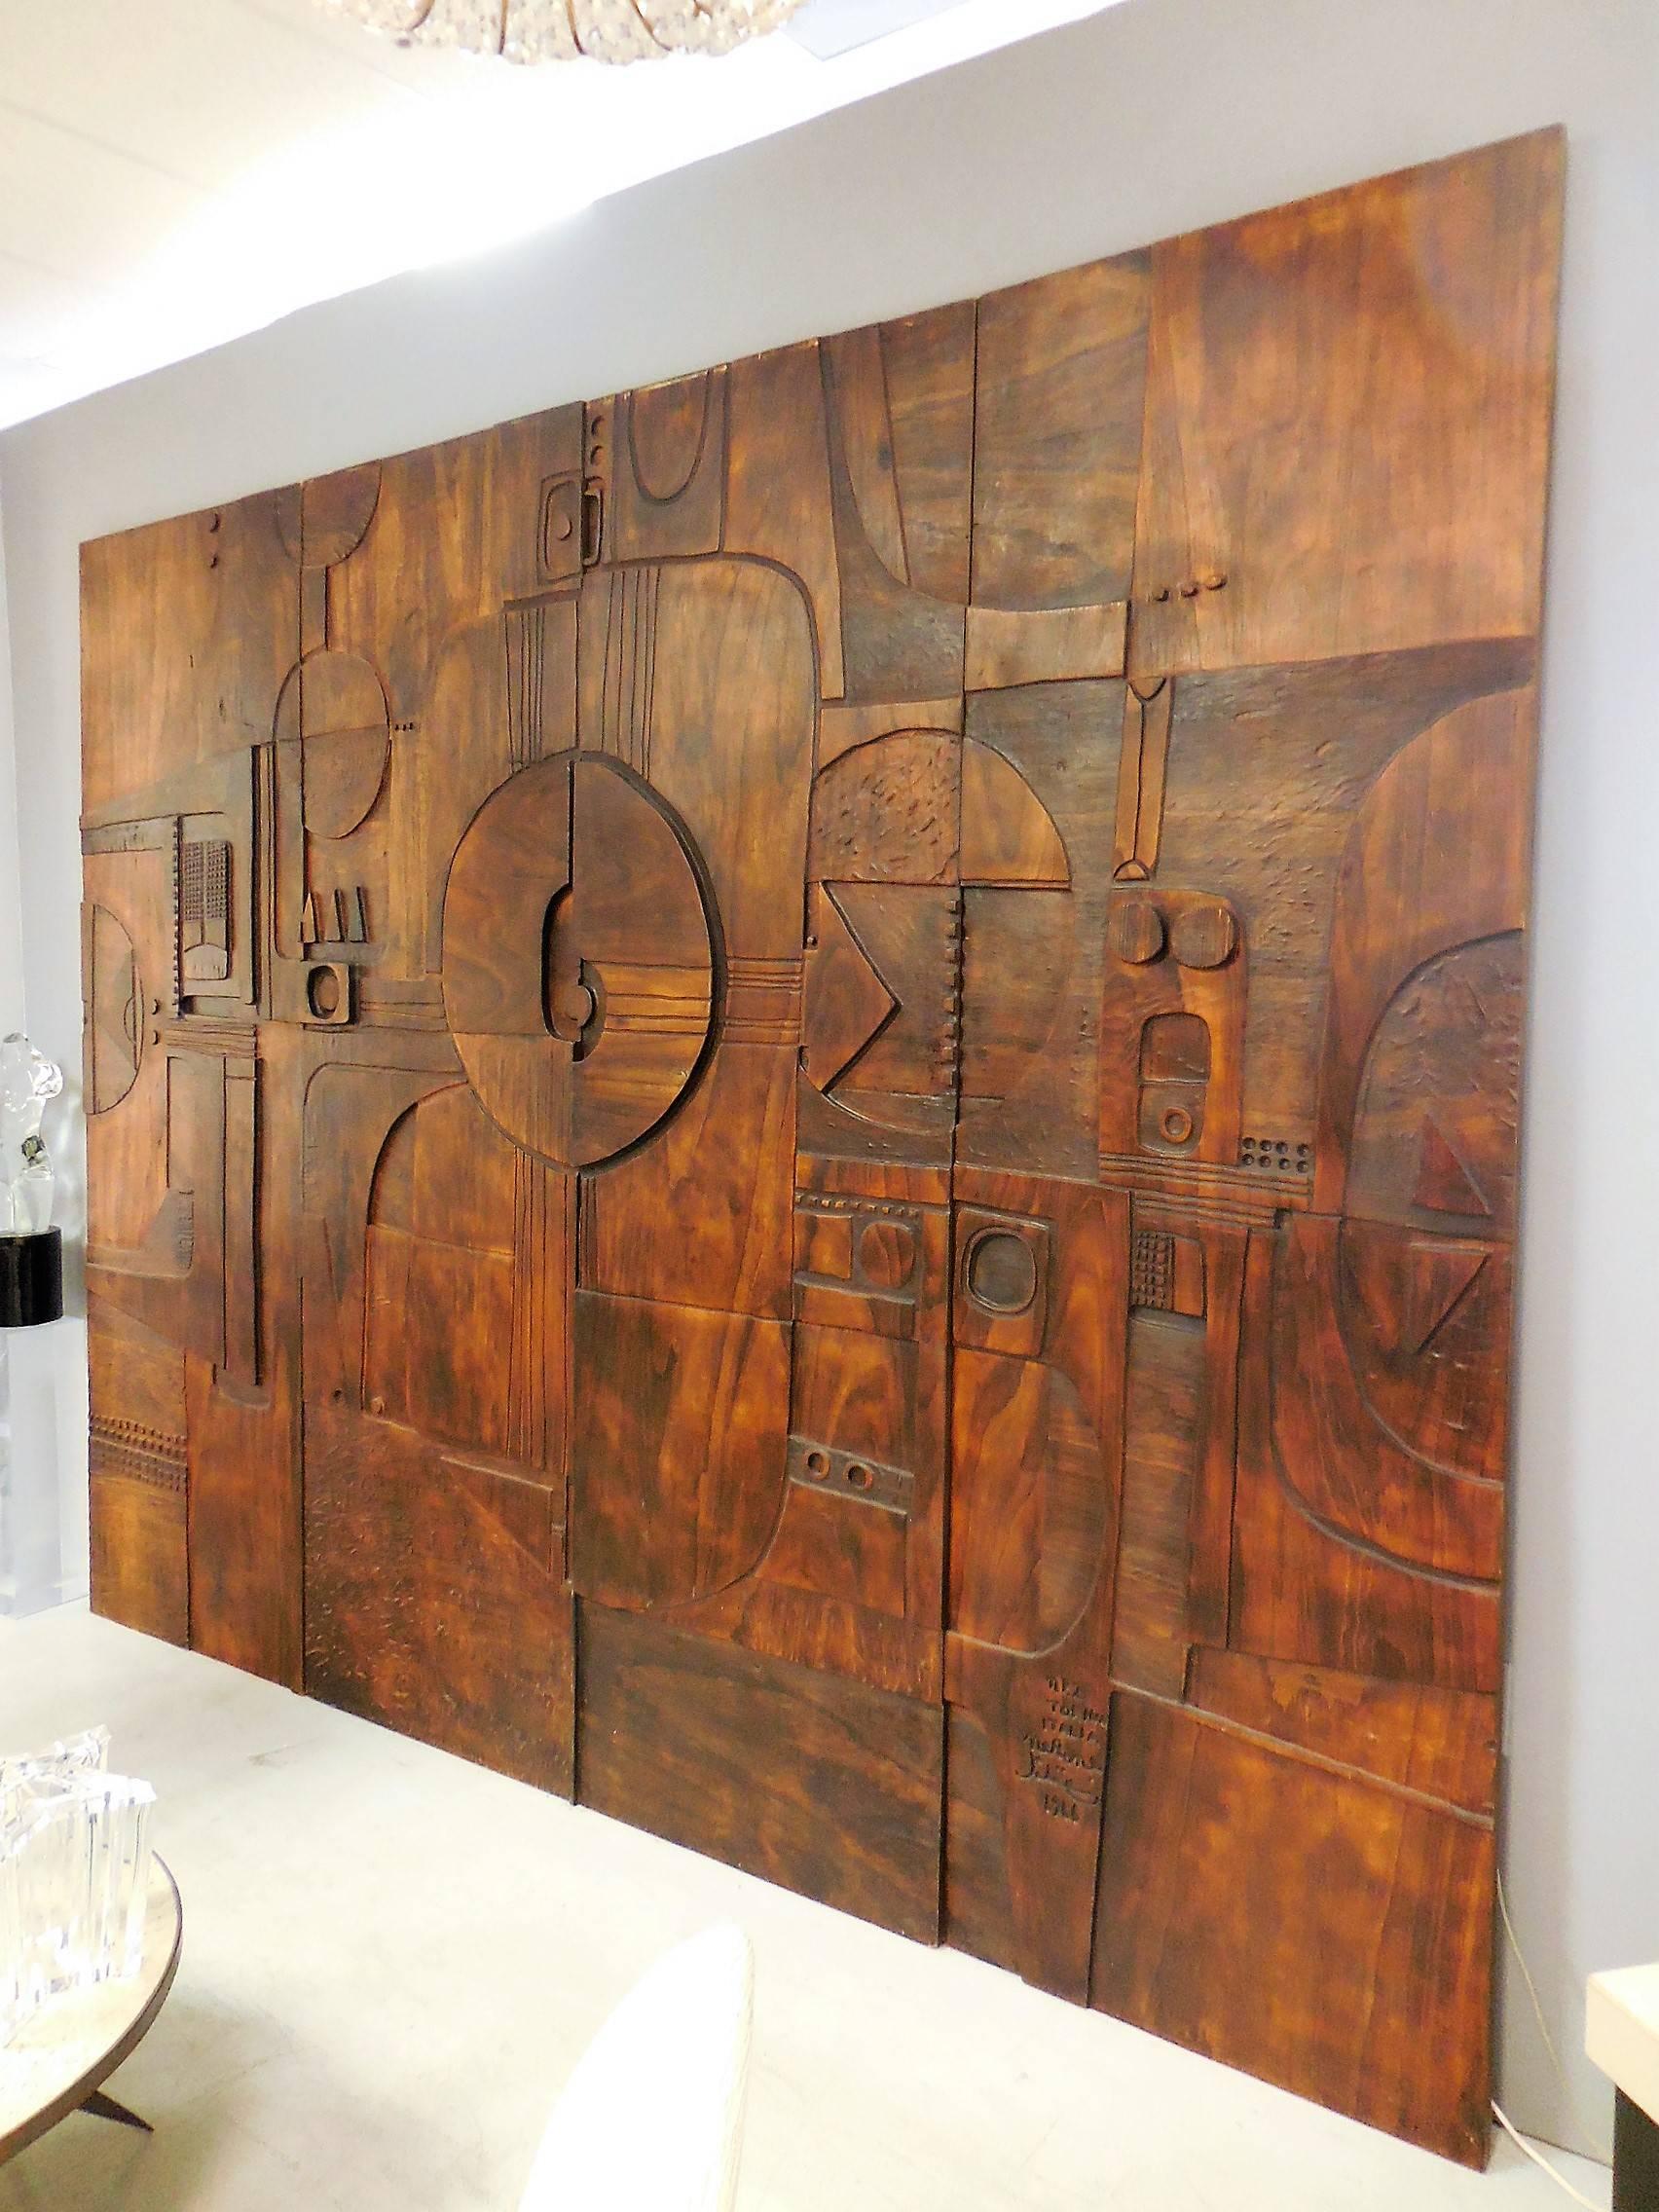 This is a monumental sculptural wall panels by Nerone and Patuzzi, Gruppo NP2. Comprised of four carved panels with modernist symbolic decoration that create a visual feast for the viewer. The carving is masterful with passages done in pyrography